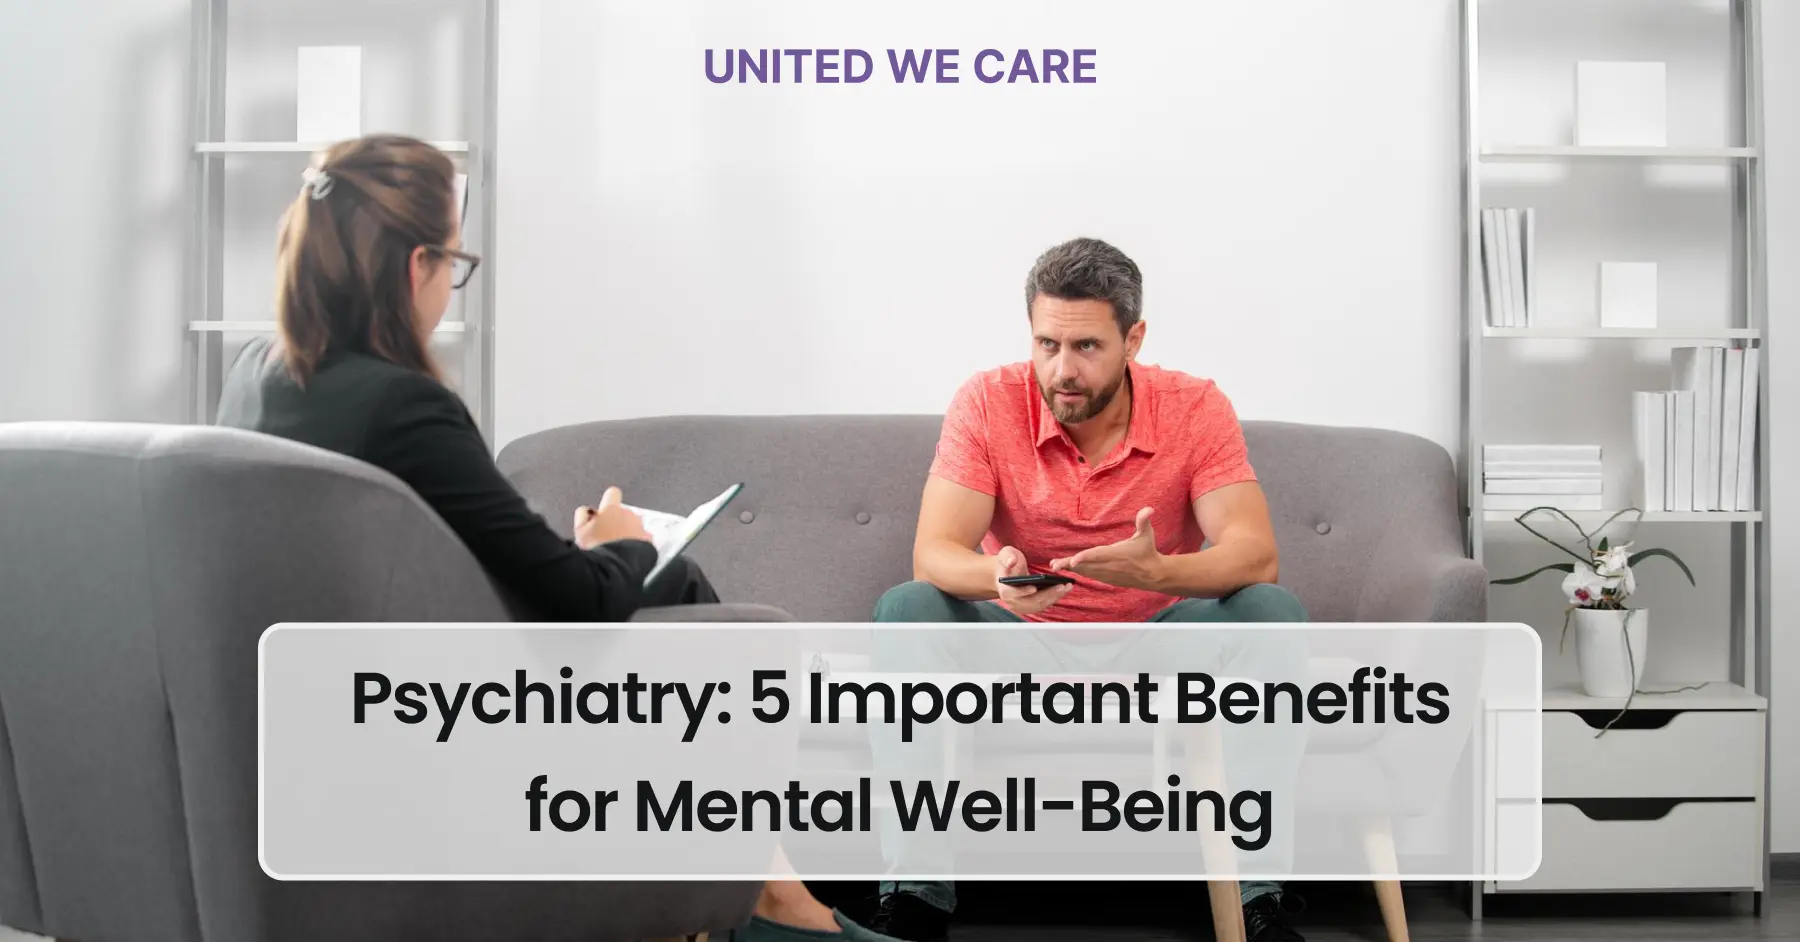 Psychiatry: 5 Important Benefits for Mental Well-Being